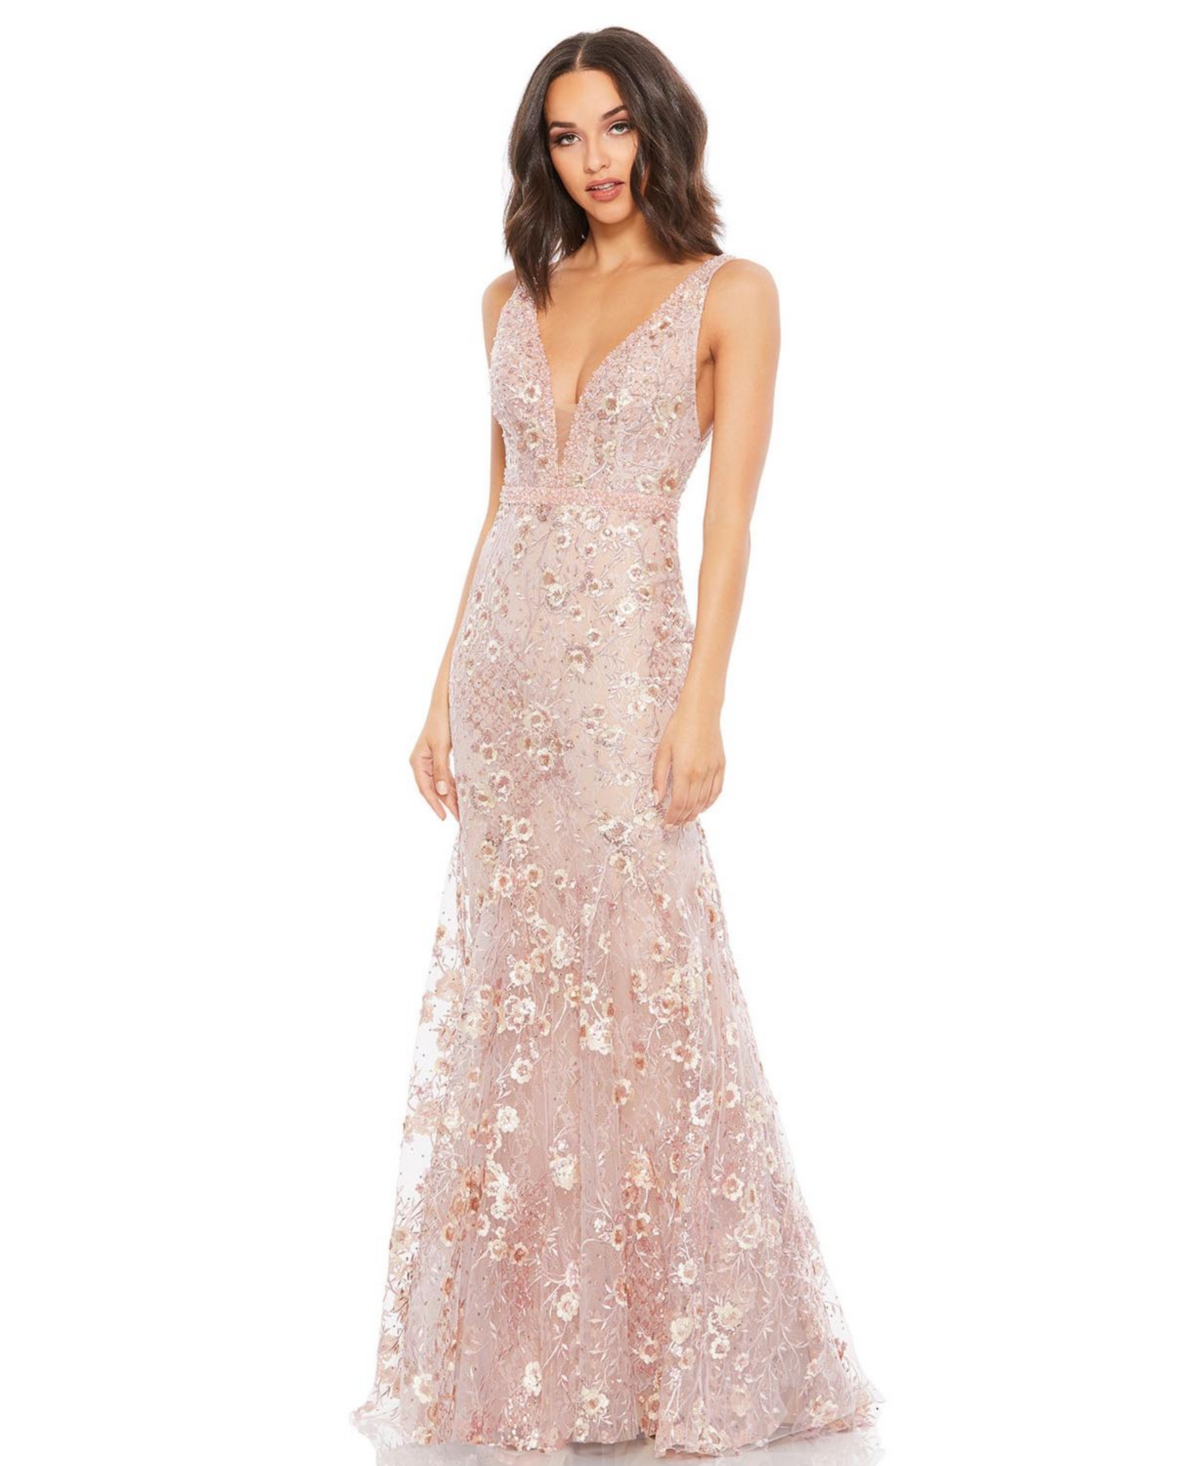 Women's Floral Embellished Sleeveless Plunge Neck Gown - Rose pink